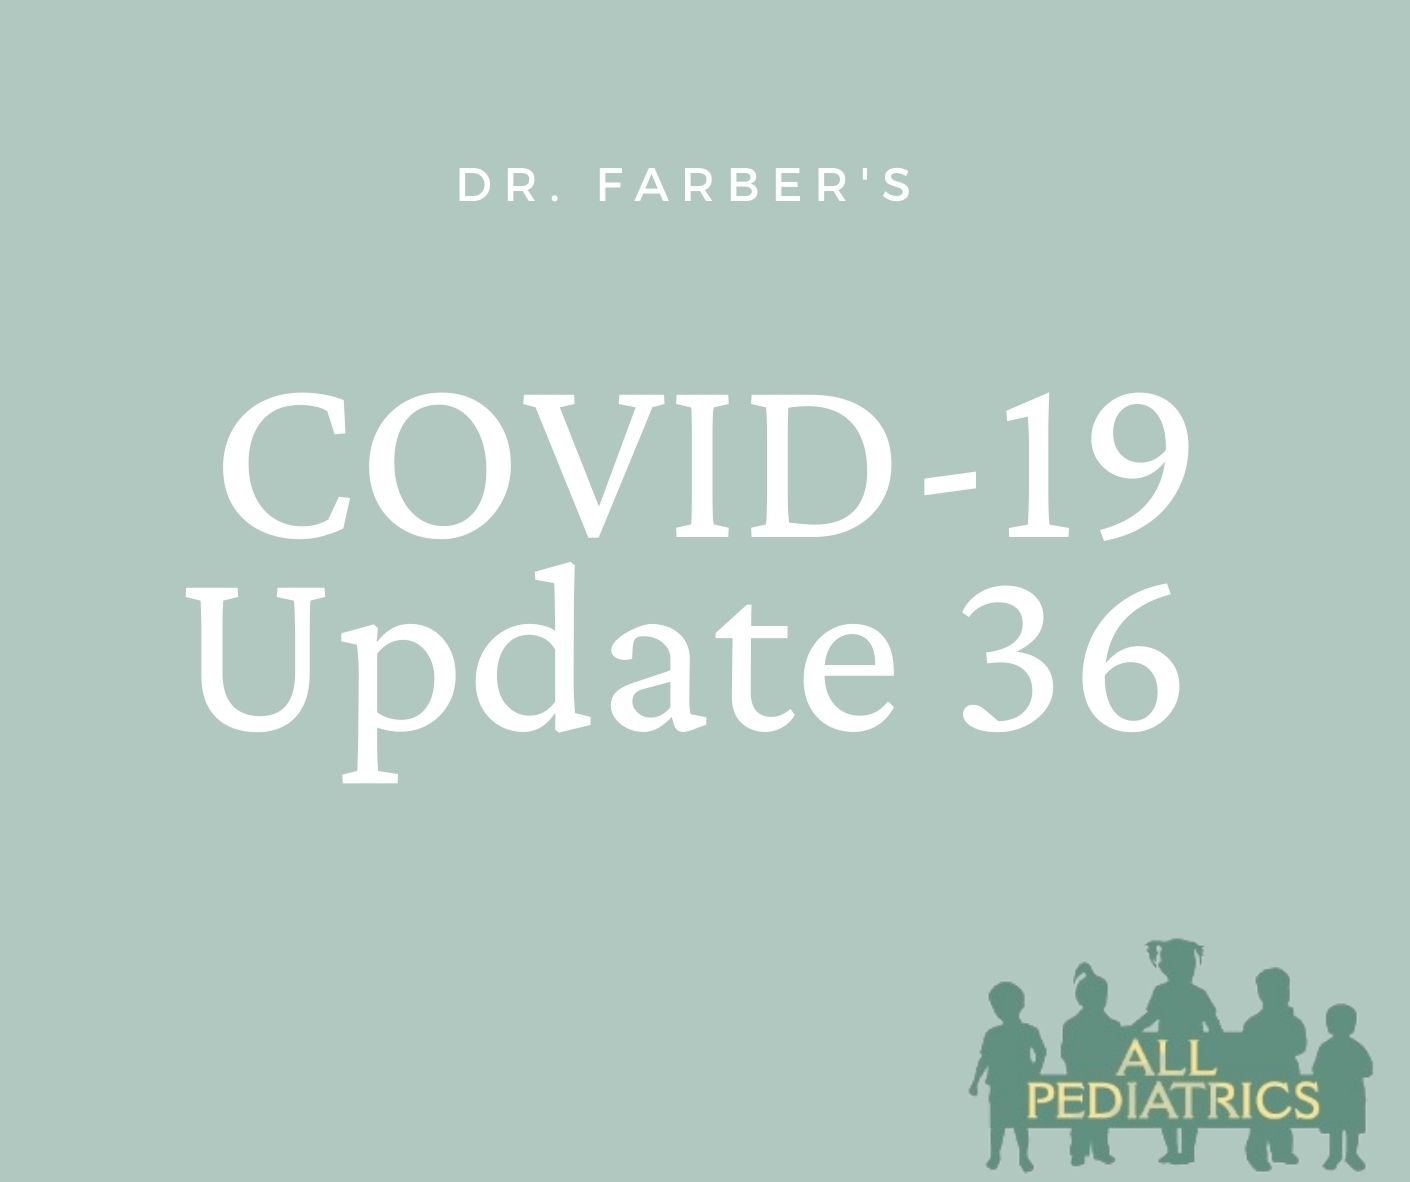 Dr. Farber's COVID-19 Update.